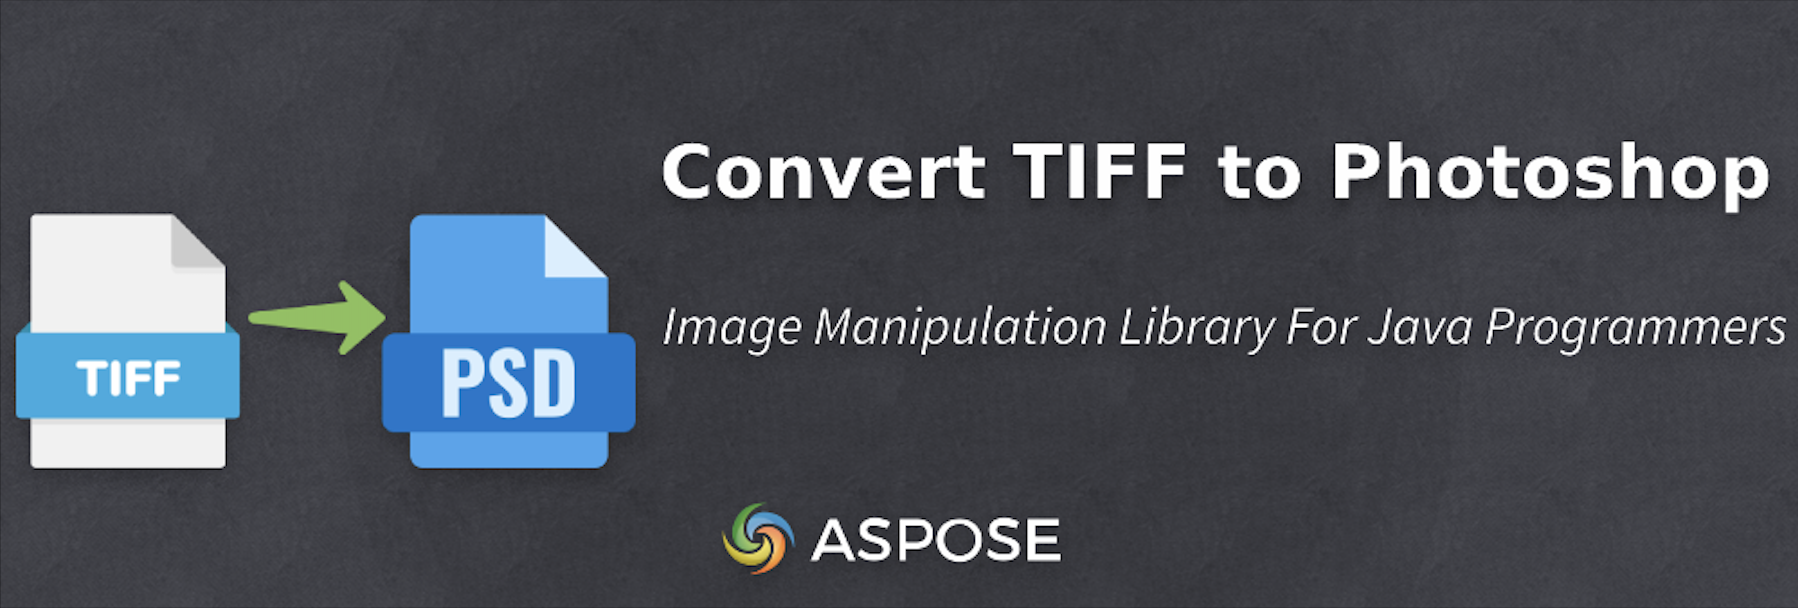 Convert TIFF to PSD in Java